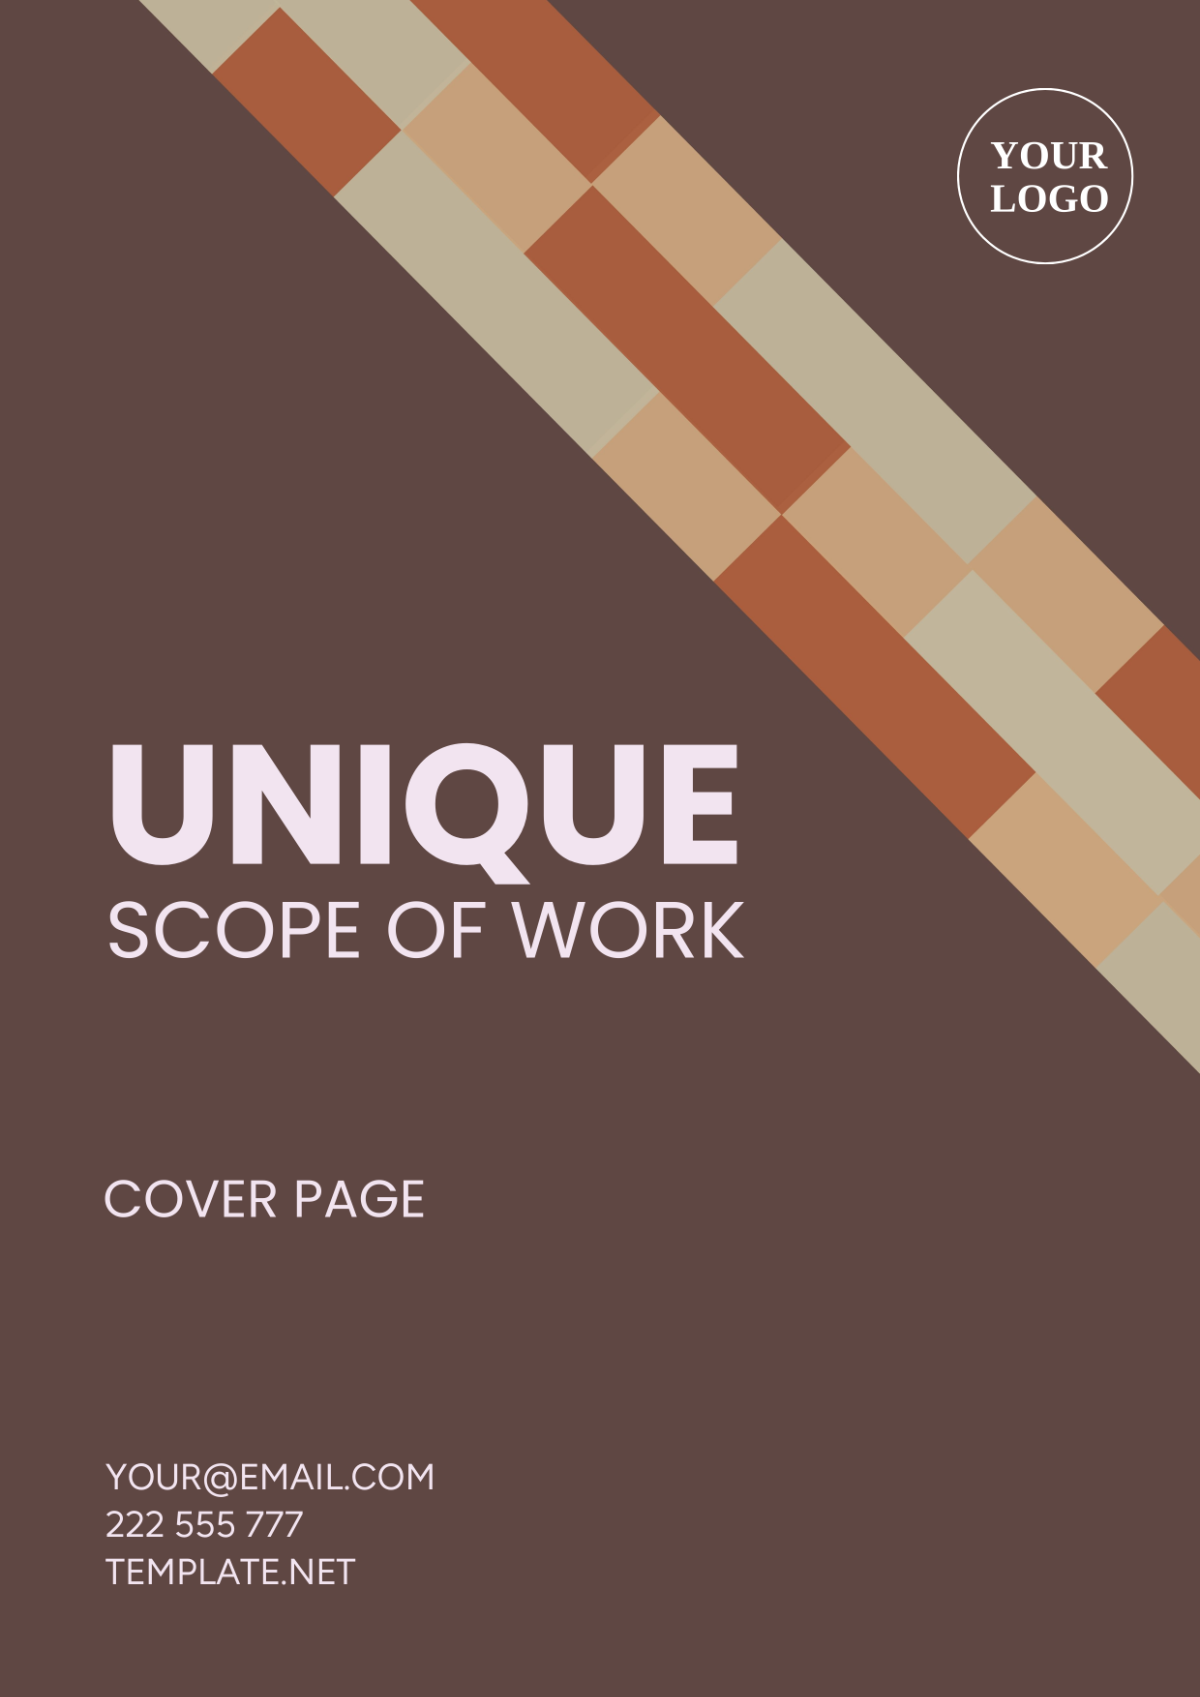 Unique Scope of Work Cover Page Template